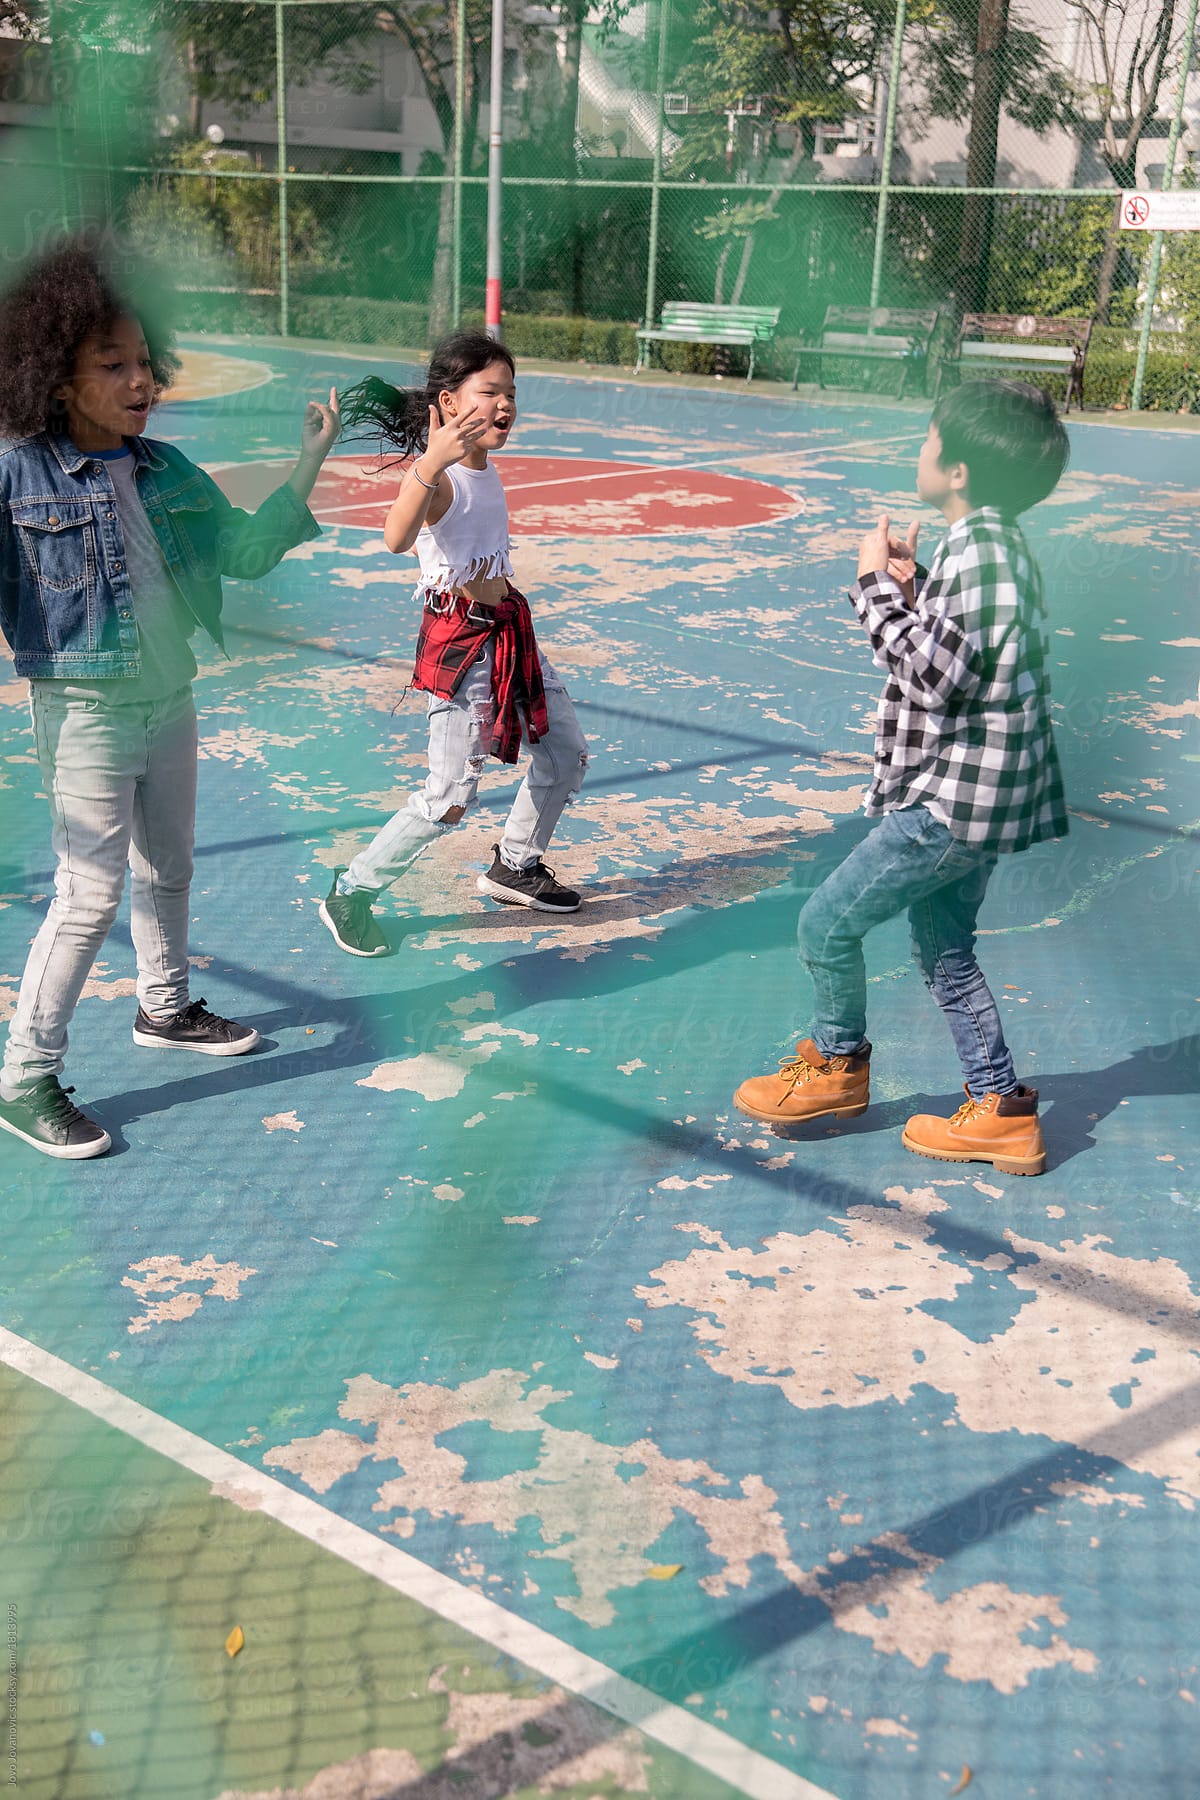 Group of three kids dancing together outside at the playground